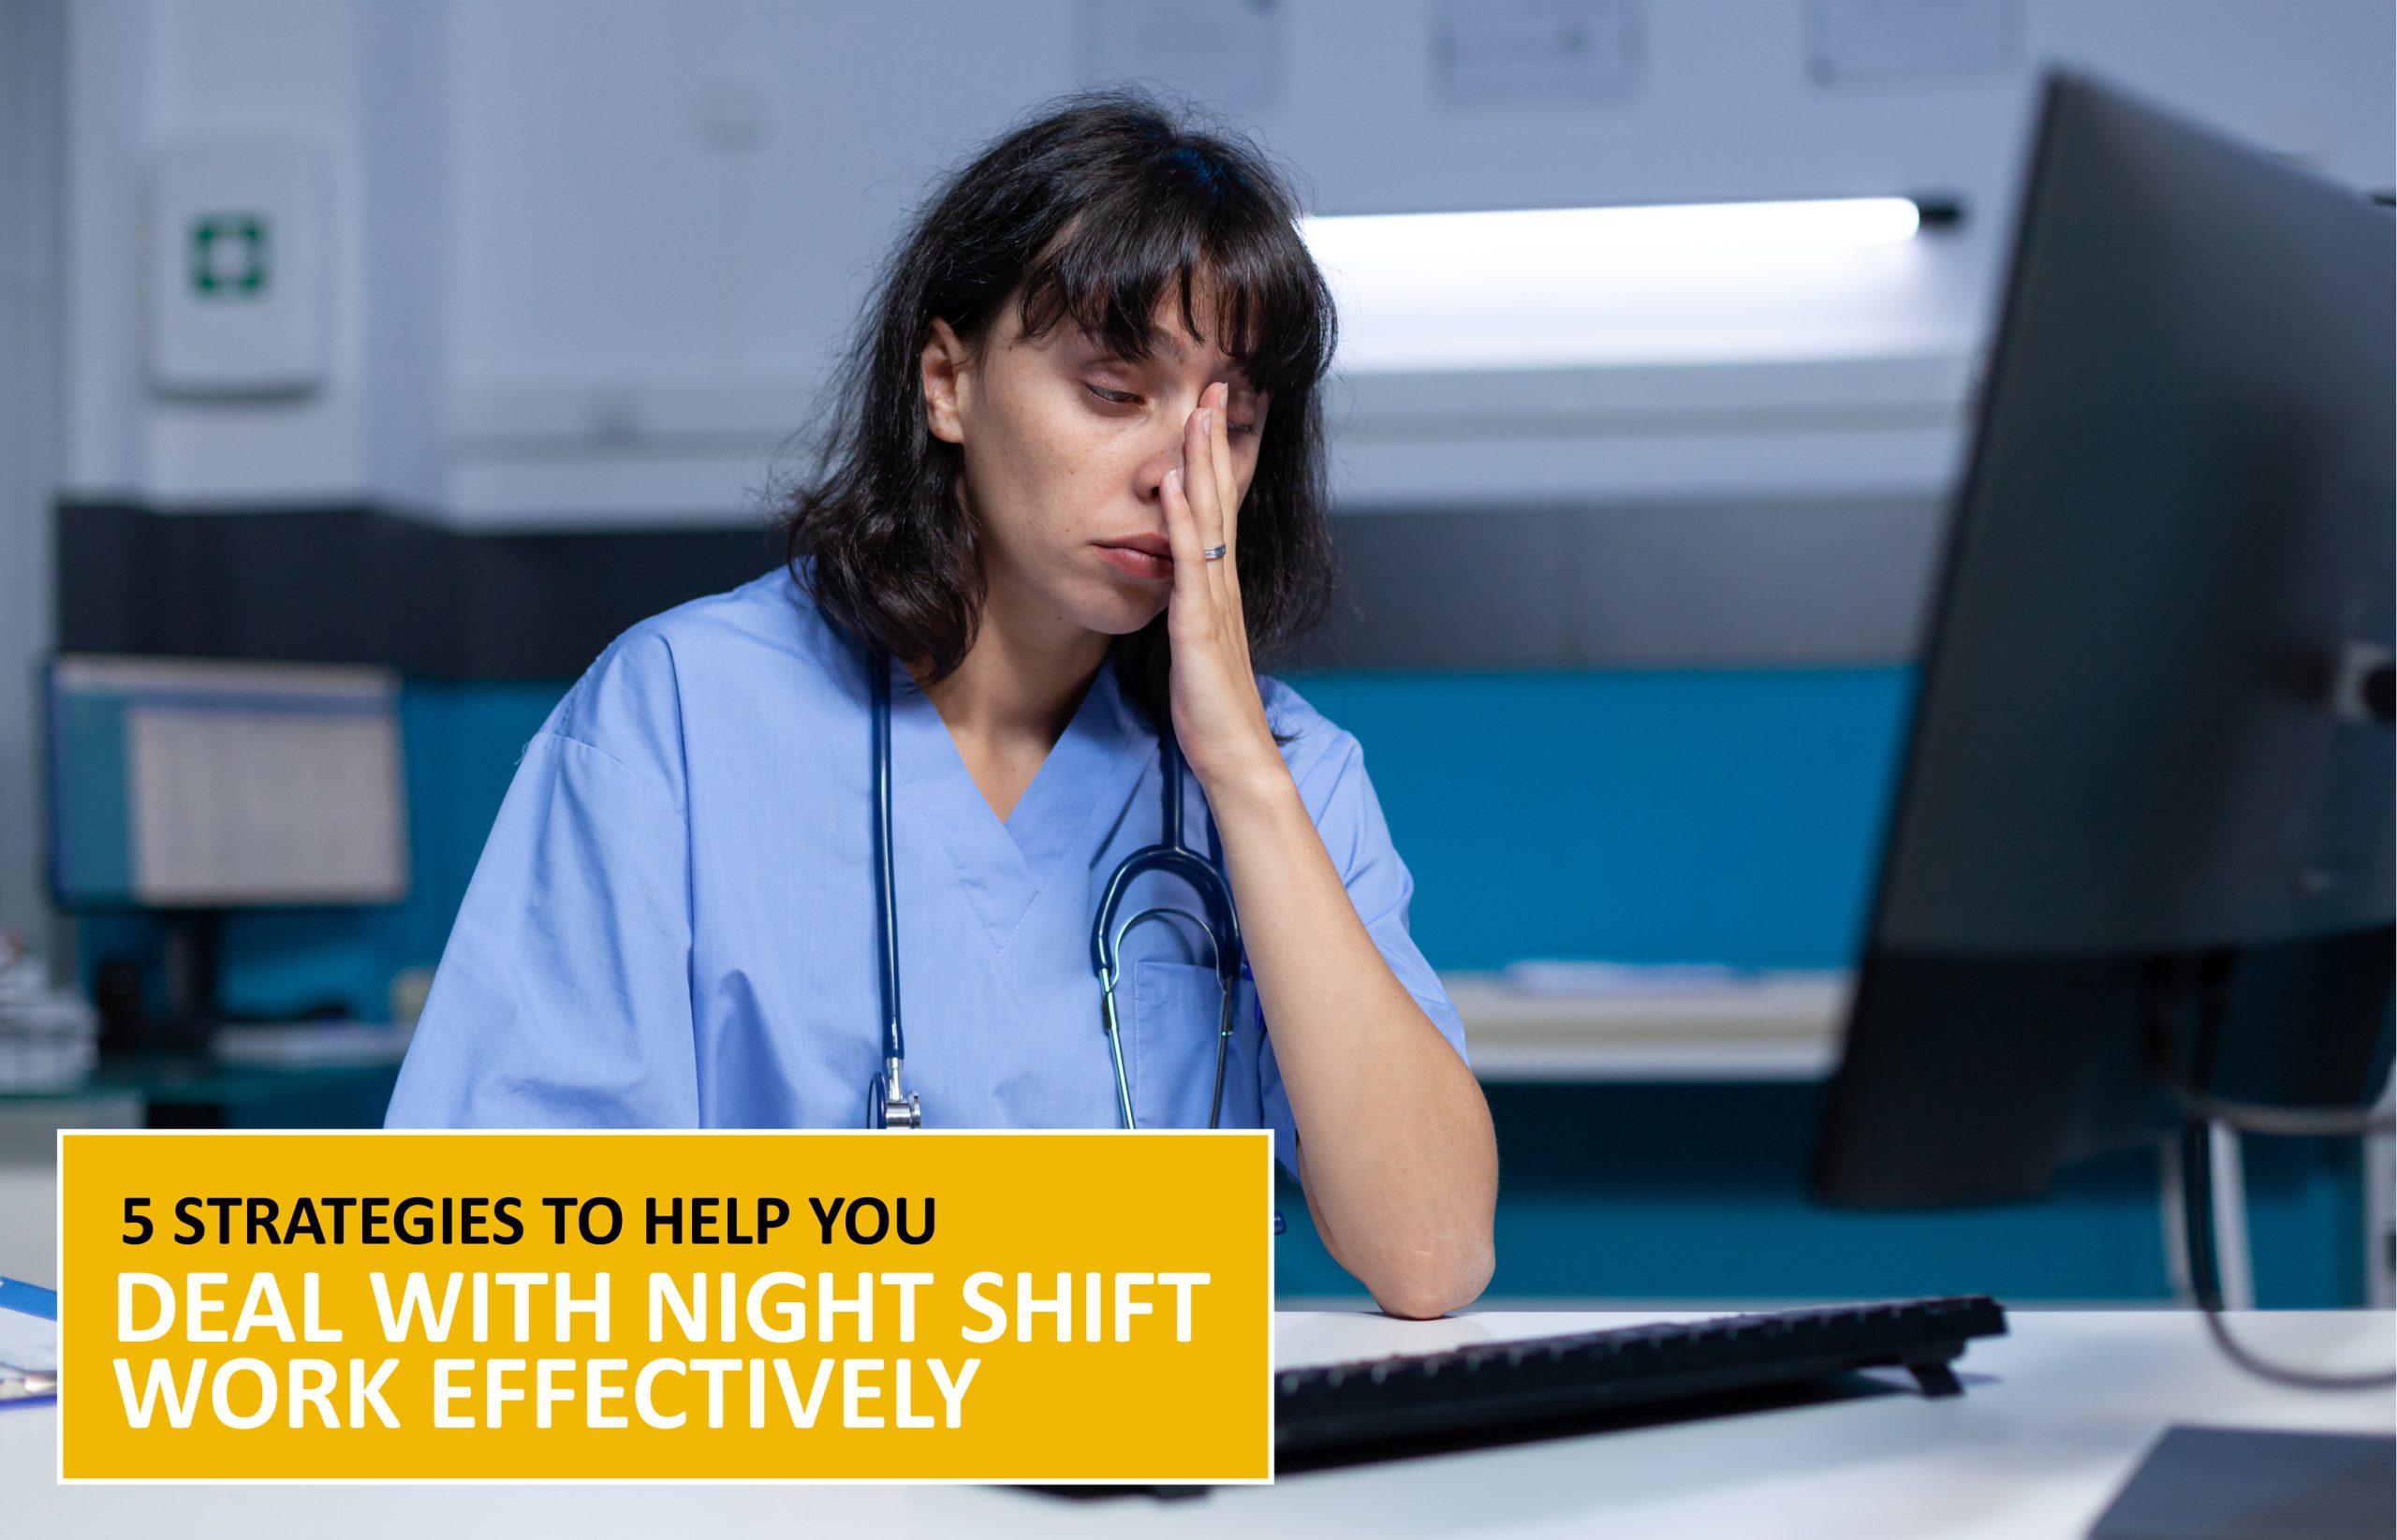 5 Strategies to Help You Deal with Night Shift Work Effectively